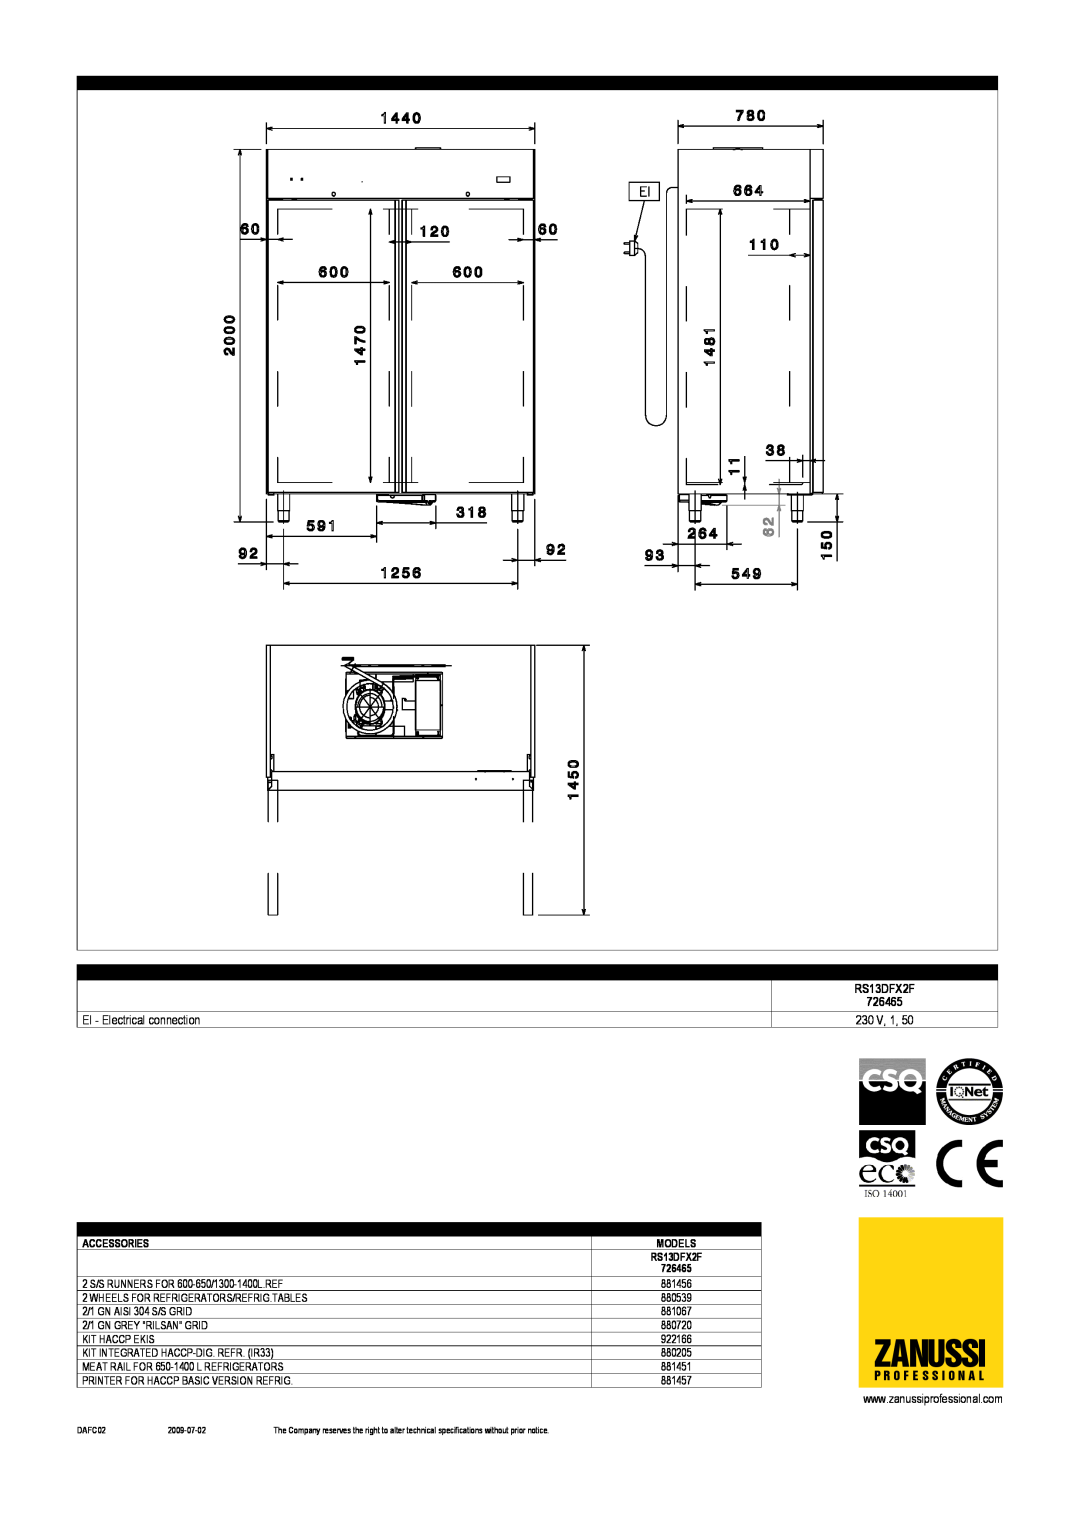 Zanussi 726465 dimensions Zanussi, EI - Electrical connection, 230, RS13DFX2F, Optional Accessories, Models 